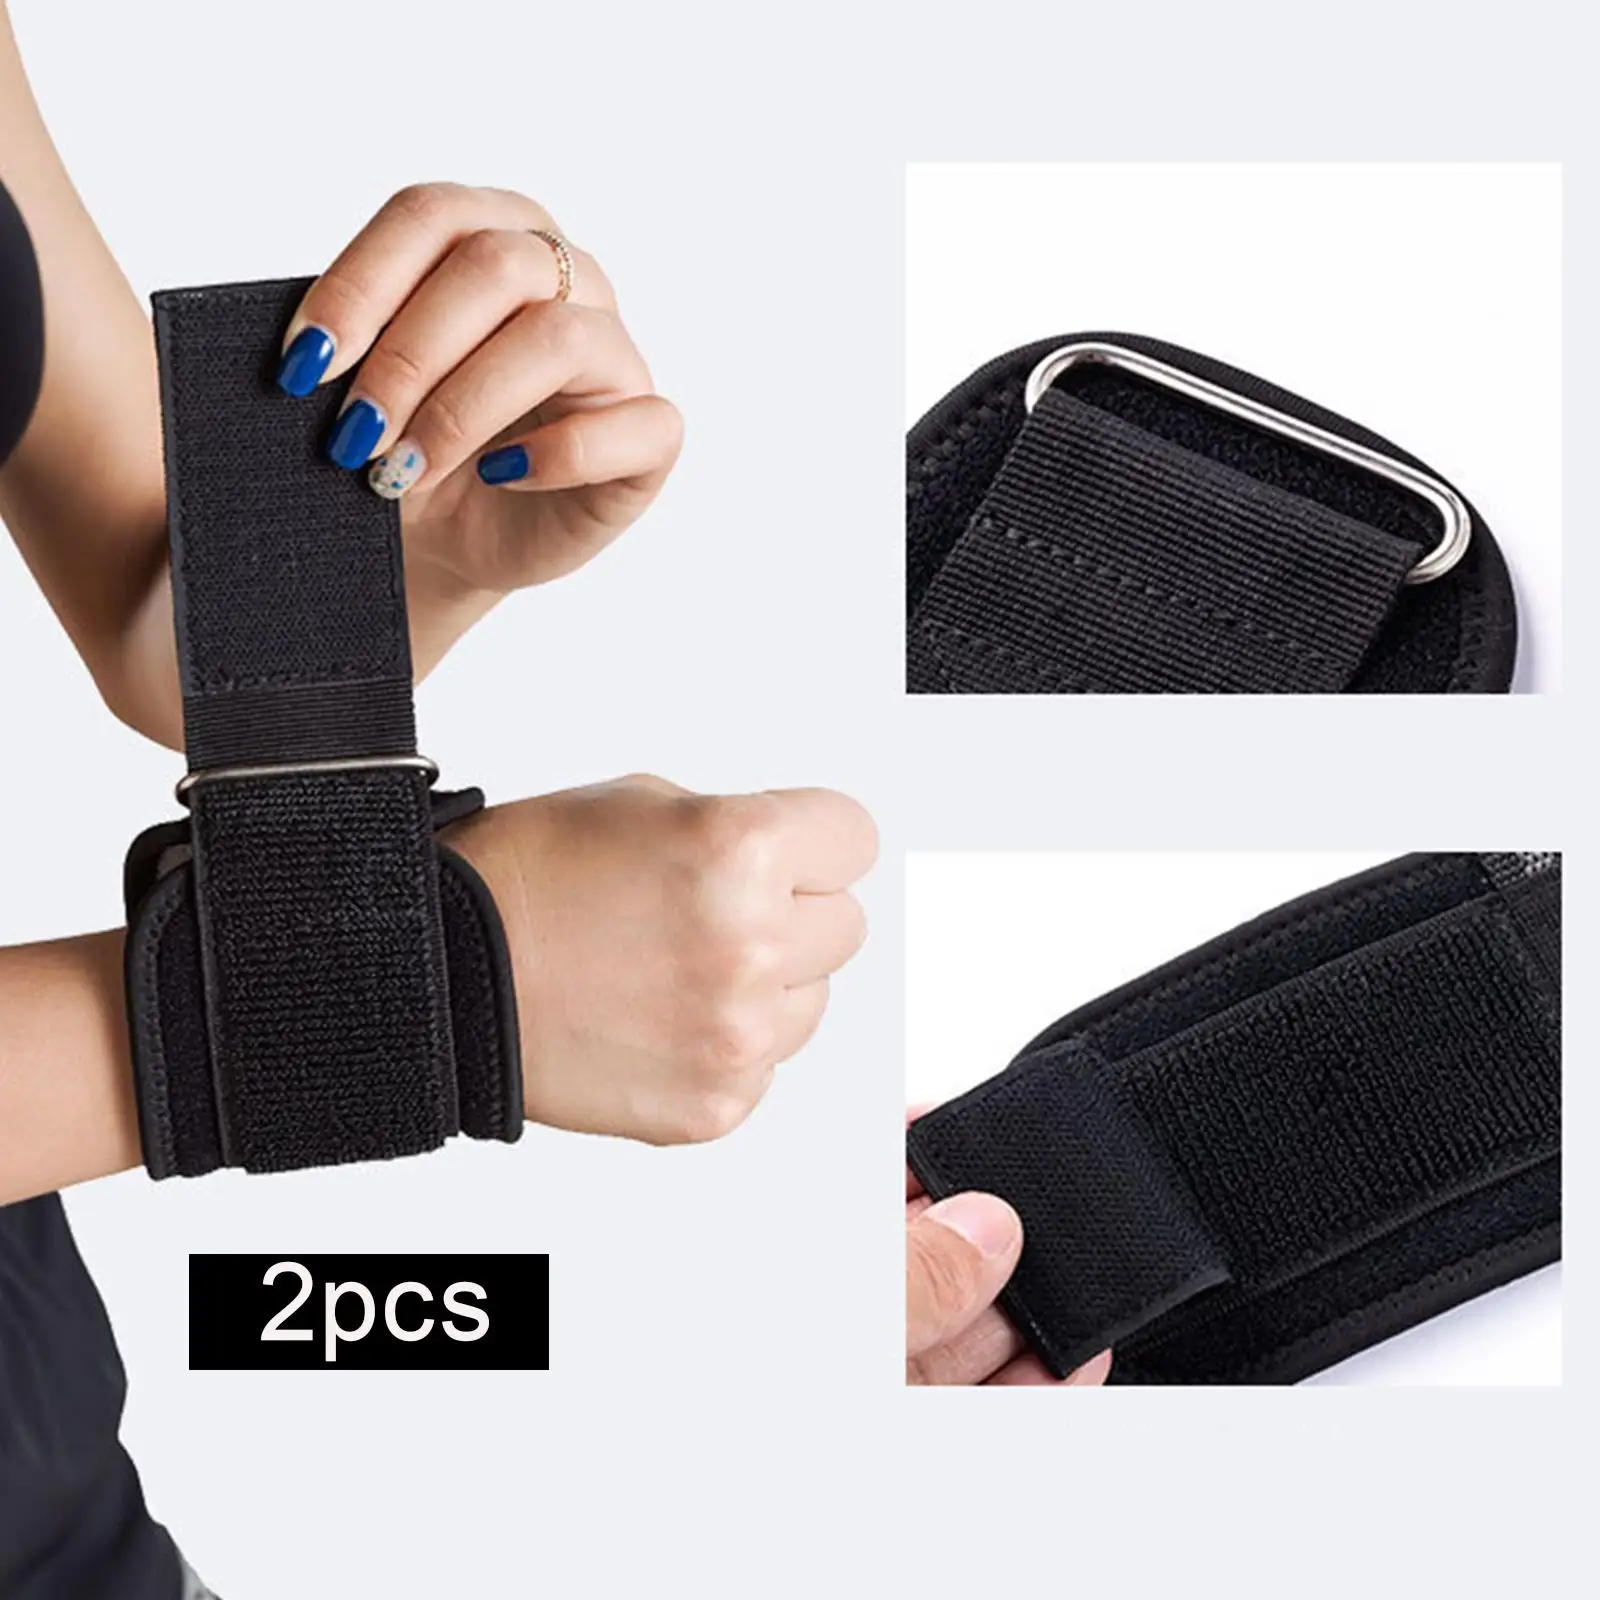 2x Weight Lifting Straps Wrist Support Adjustable Gloves Press